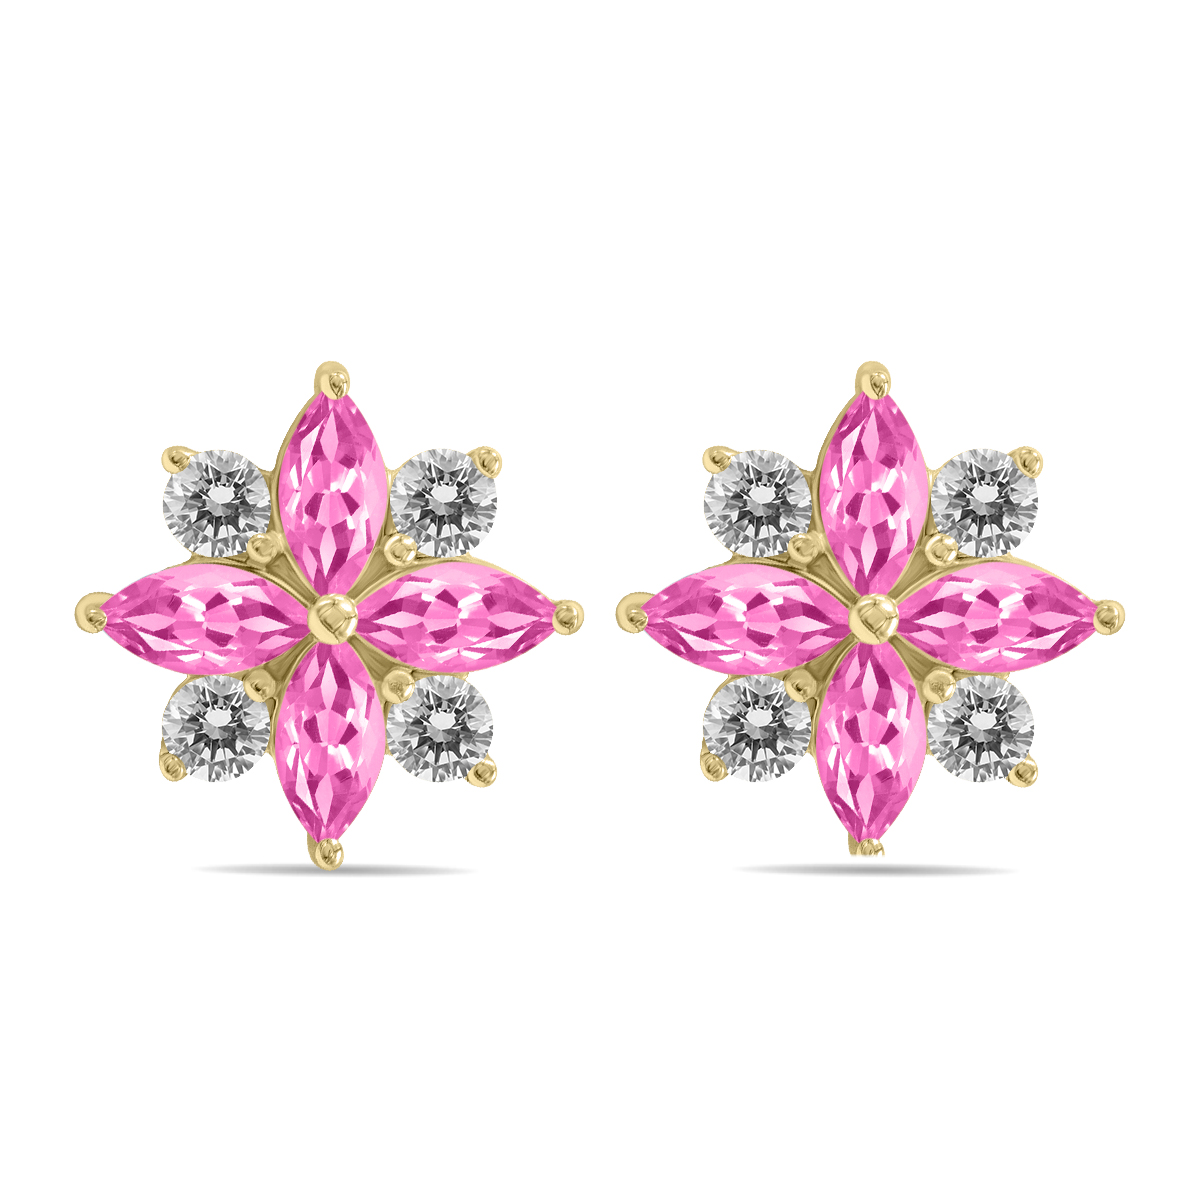 Image of 1 Carat TW Pink Topaz and Diamond Flower Earrings in 10K Yellow Gold